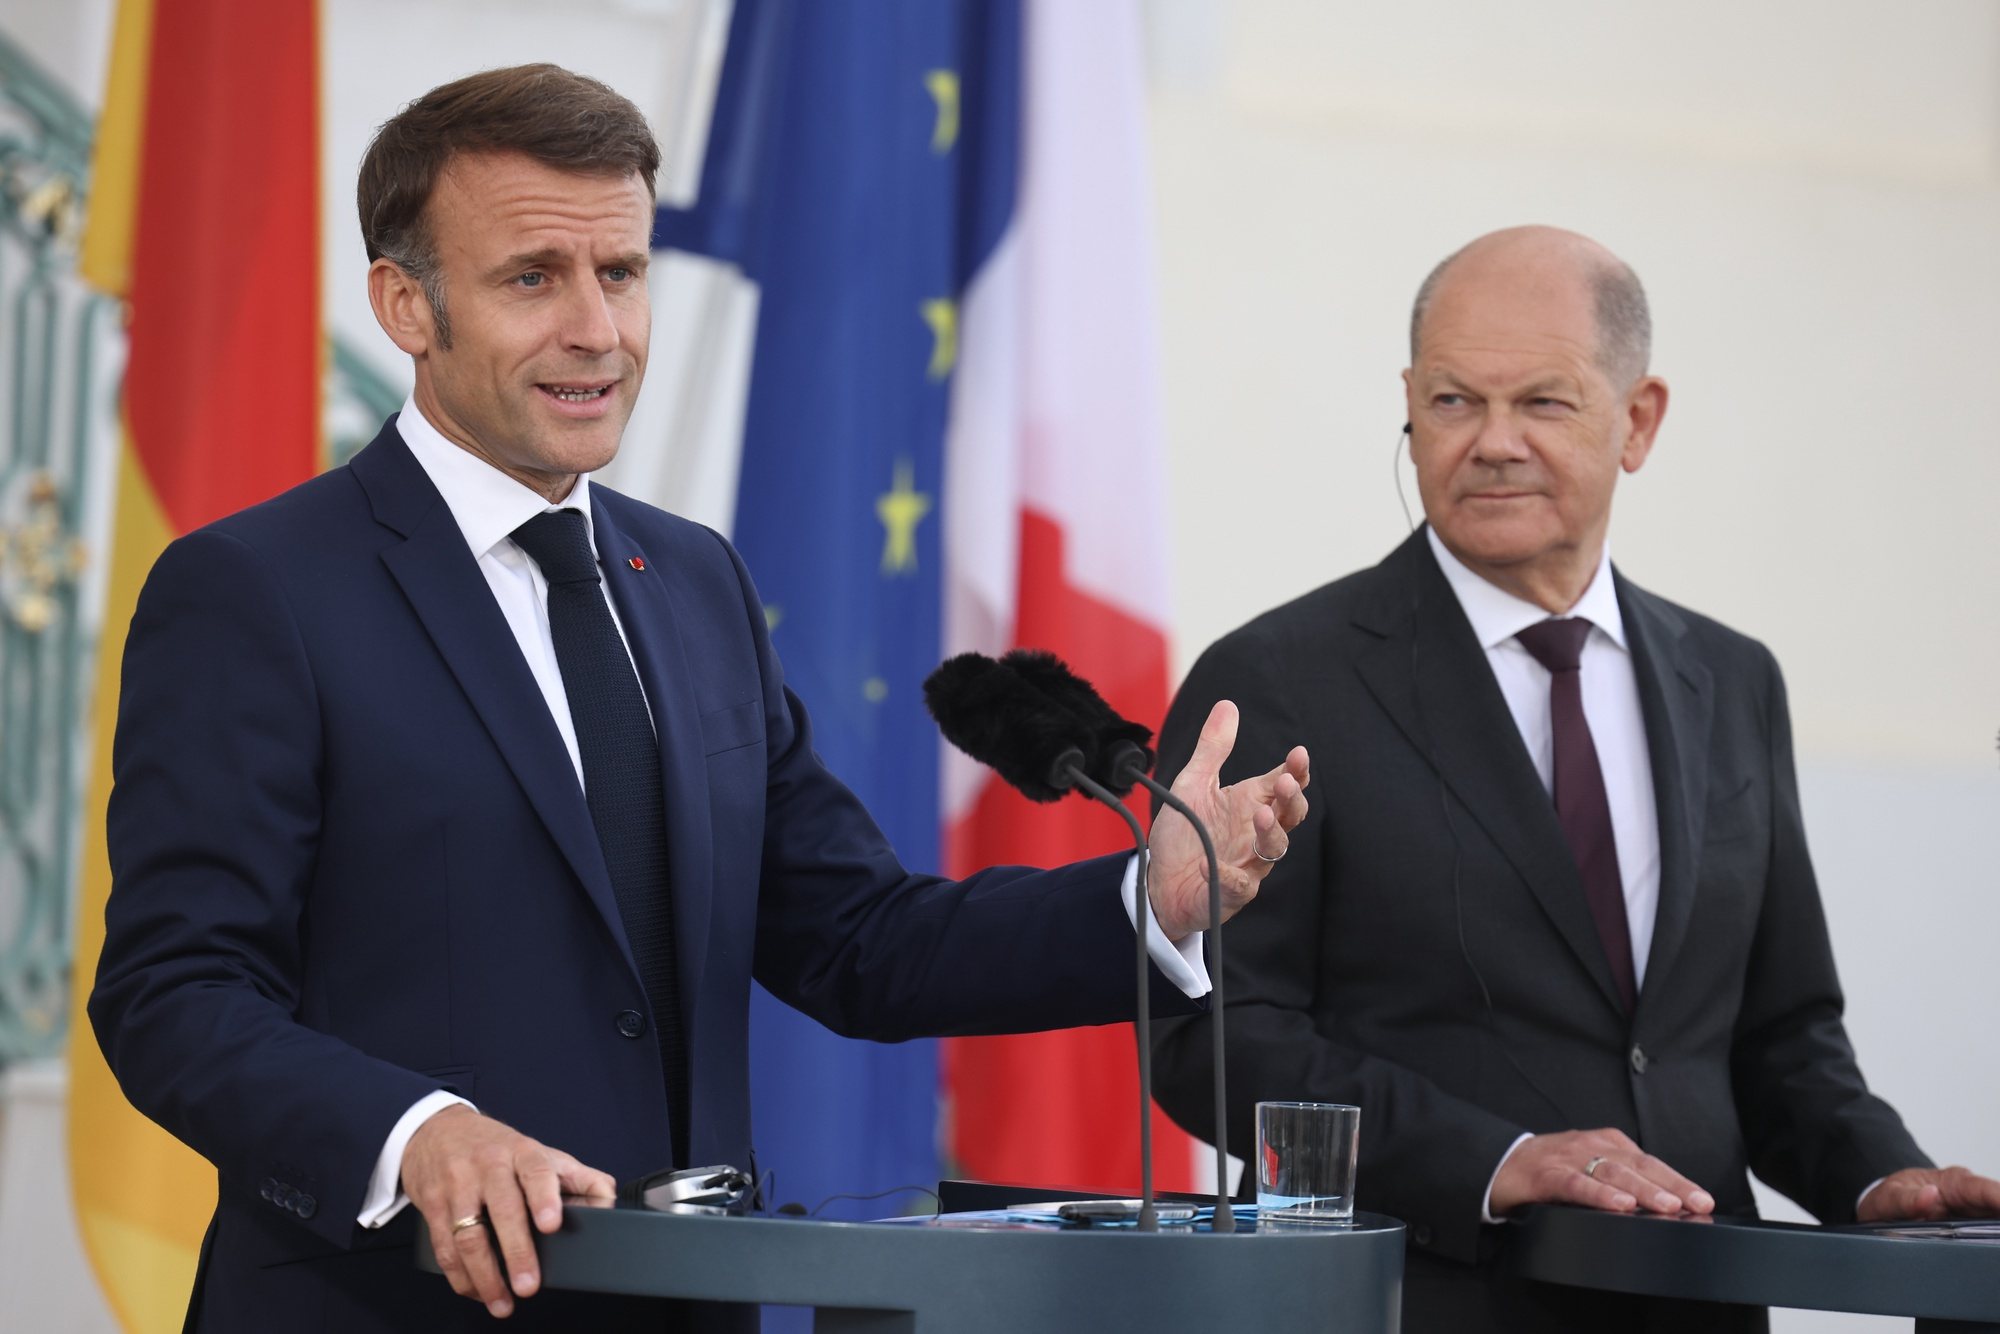 epa11375932 French President Emmanuel Macron (L) gestures next to German Chancellor Olaf Scholz during a joint press conference at Meseberg Palace in Meseberg near Gransee, Germany, 28 May 2024. French President Emmanuel Macron visits Germany from 26 to 28 May. After appointments with Federal President Steinmeier in German regions Berlin, Dresden and Muenster, Macron meets German Chancellor Olaf Scholz at Meseberg Palace on 28 May 2024 for a Franco-German Council of Ministers.  EPA/CLEMENS BILAN